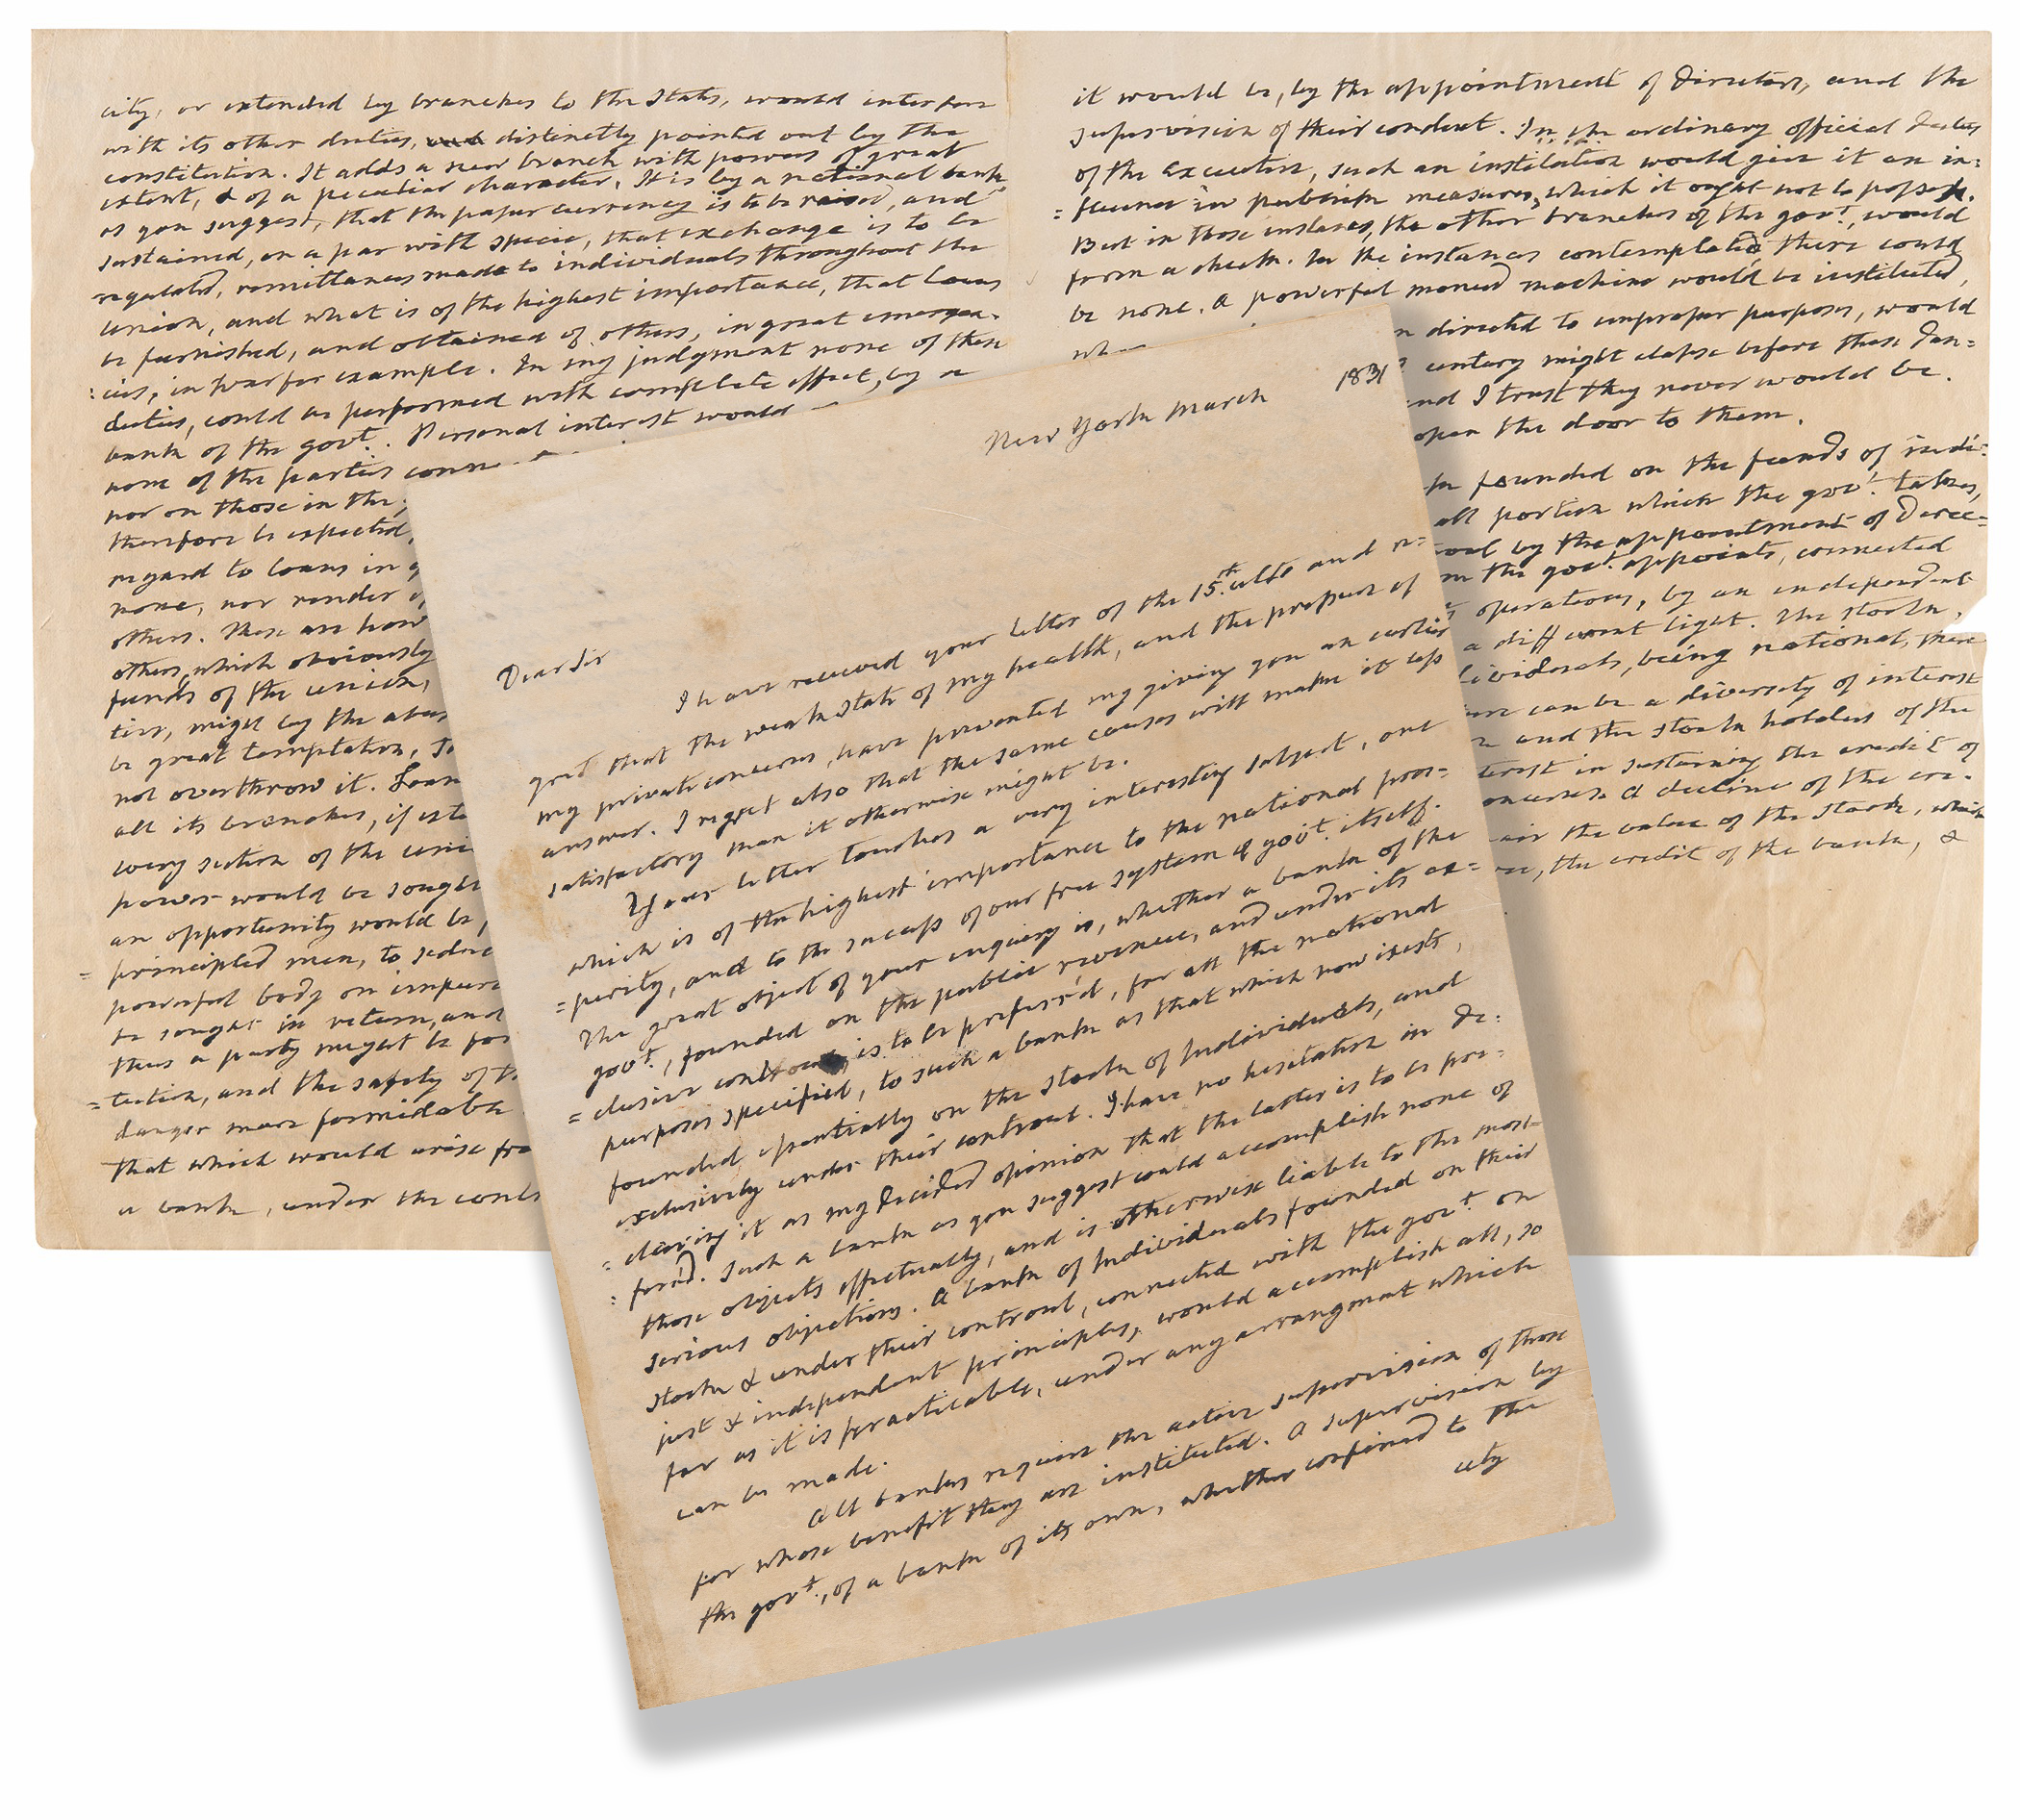 Lot #5 James Monroe Handwritten Draft Letter on the Constitution and National Bank - Image 1